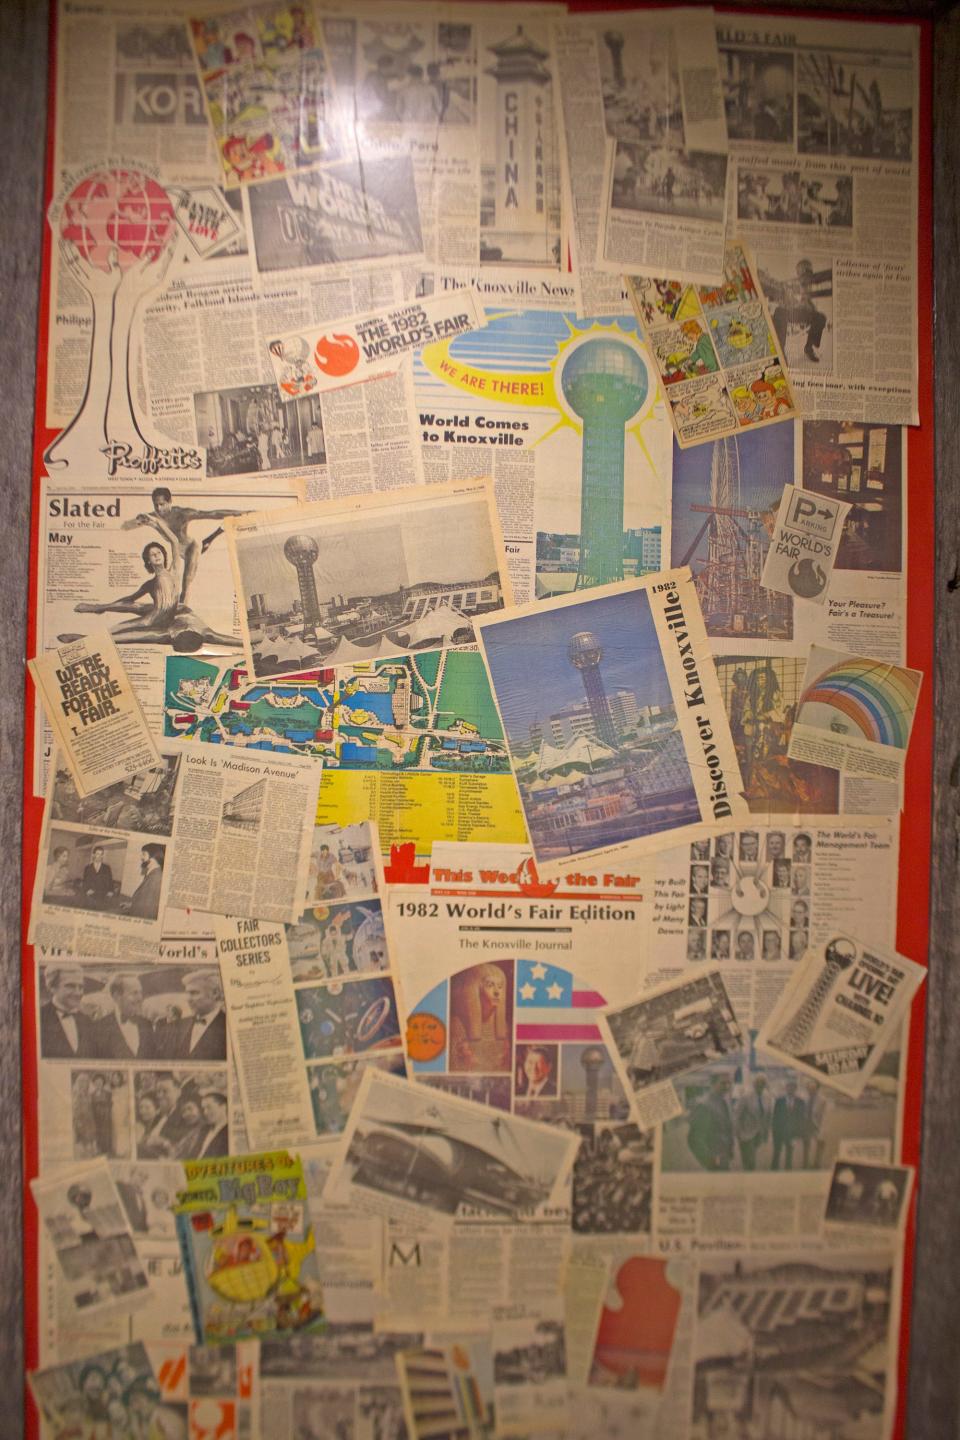 This collage of 1982 World’s Fair newspaper clippings makes for interesting reading at Sweet P’s Downtown Dive on Jackson Avenue.